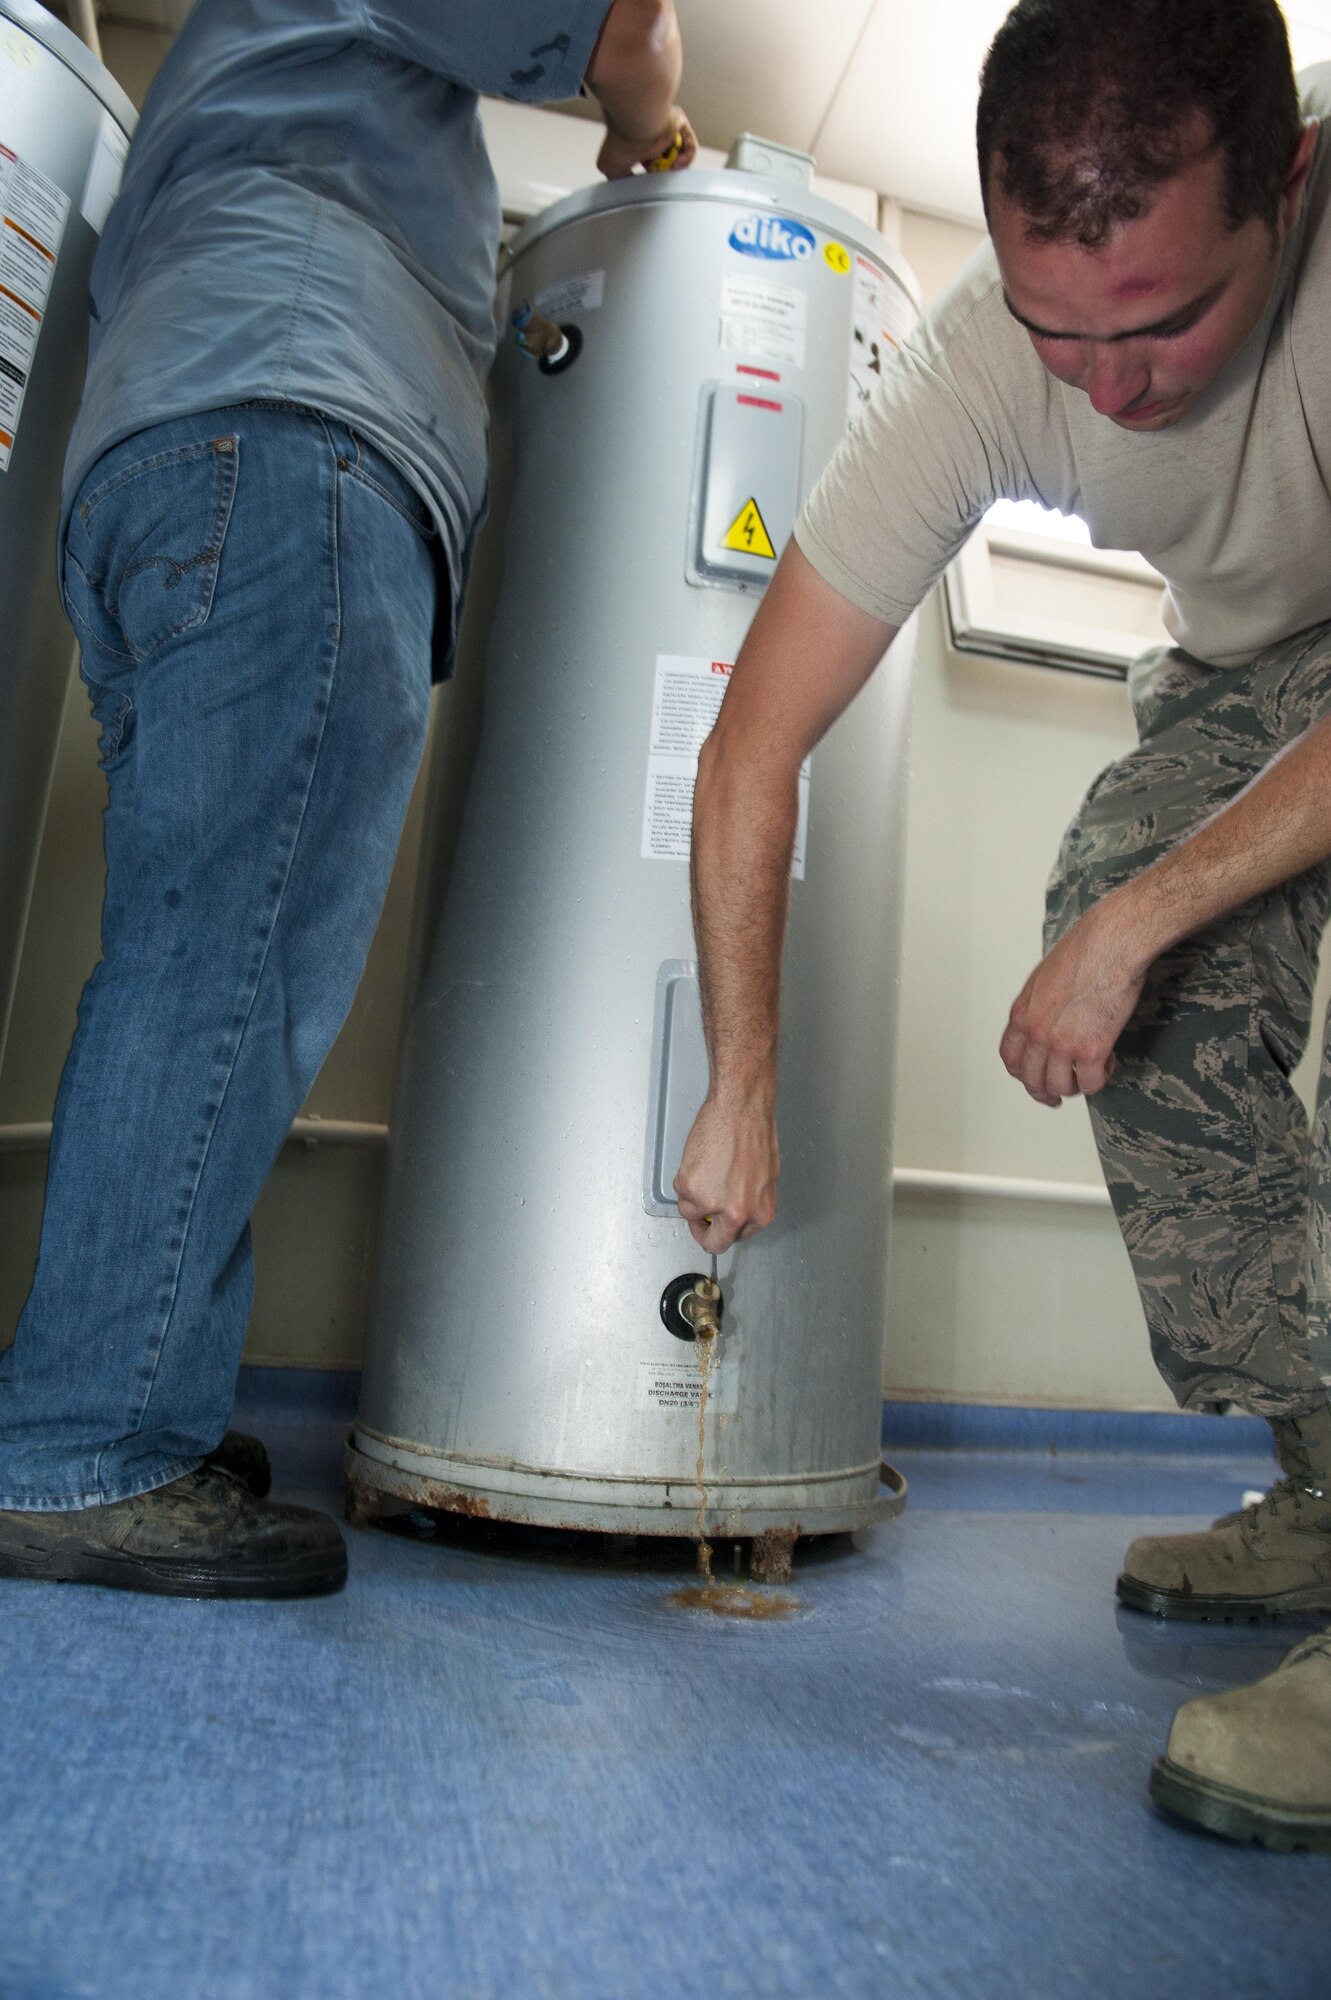 U.S. Air Force Staff Sgt. Ryan Bombardiere, 48th Civil Engineer Squadron (CES) water fuels system maintenance technician, drains water from a water heater July 28, 2016, at Incirlik Air Base, Turkey. Servicemembers from across U.S. Air Forces in Europe-Air Forces Africa came on temporary duty after a request for forces was submitted by the 39th CES. (U.S. Air Force photo by Staff Sgt. Jack Sanders)